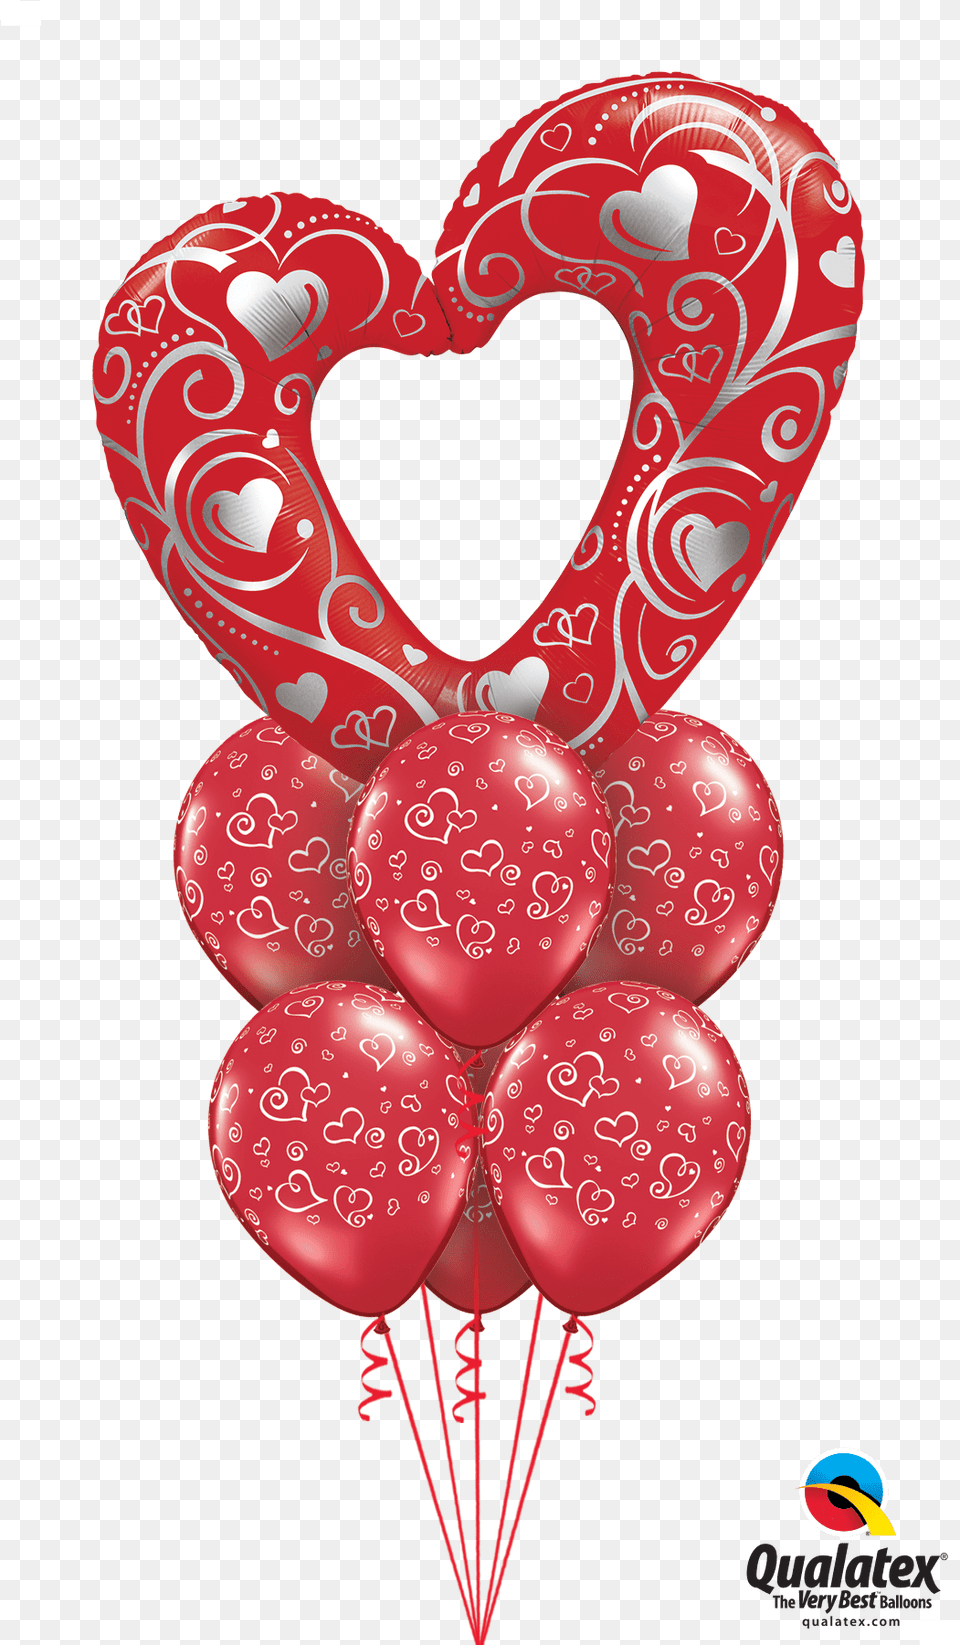 Download Mega Heart Balloon Bouquet Valentineu0027s Day Png Image